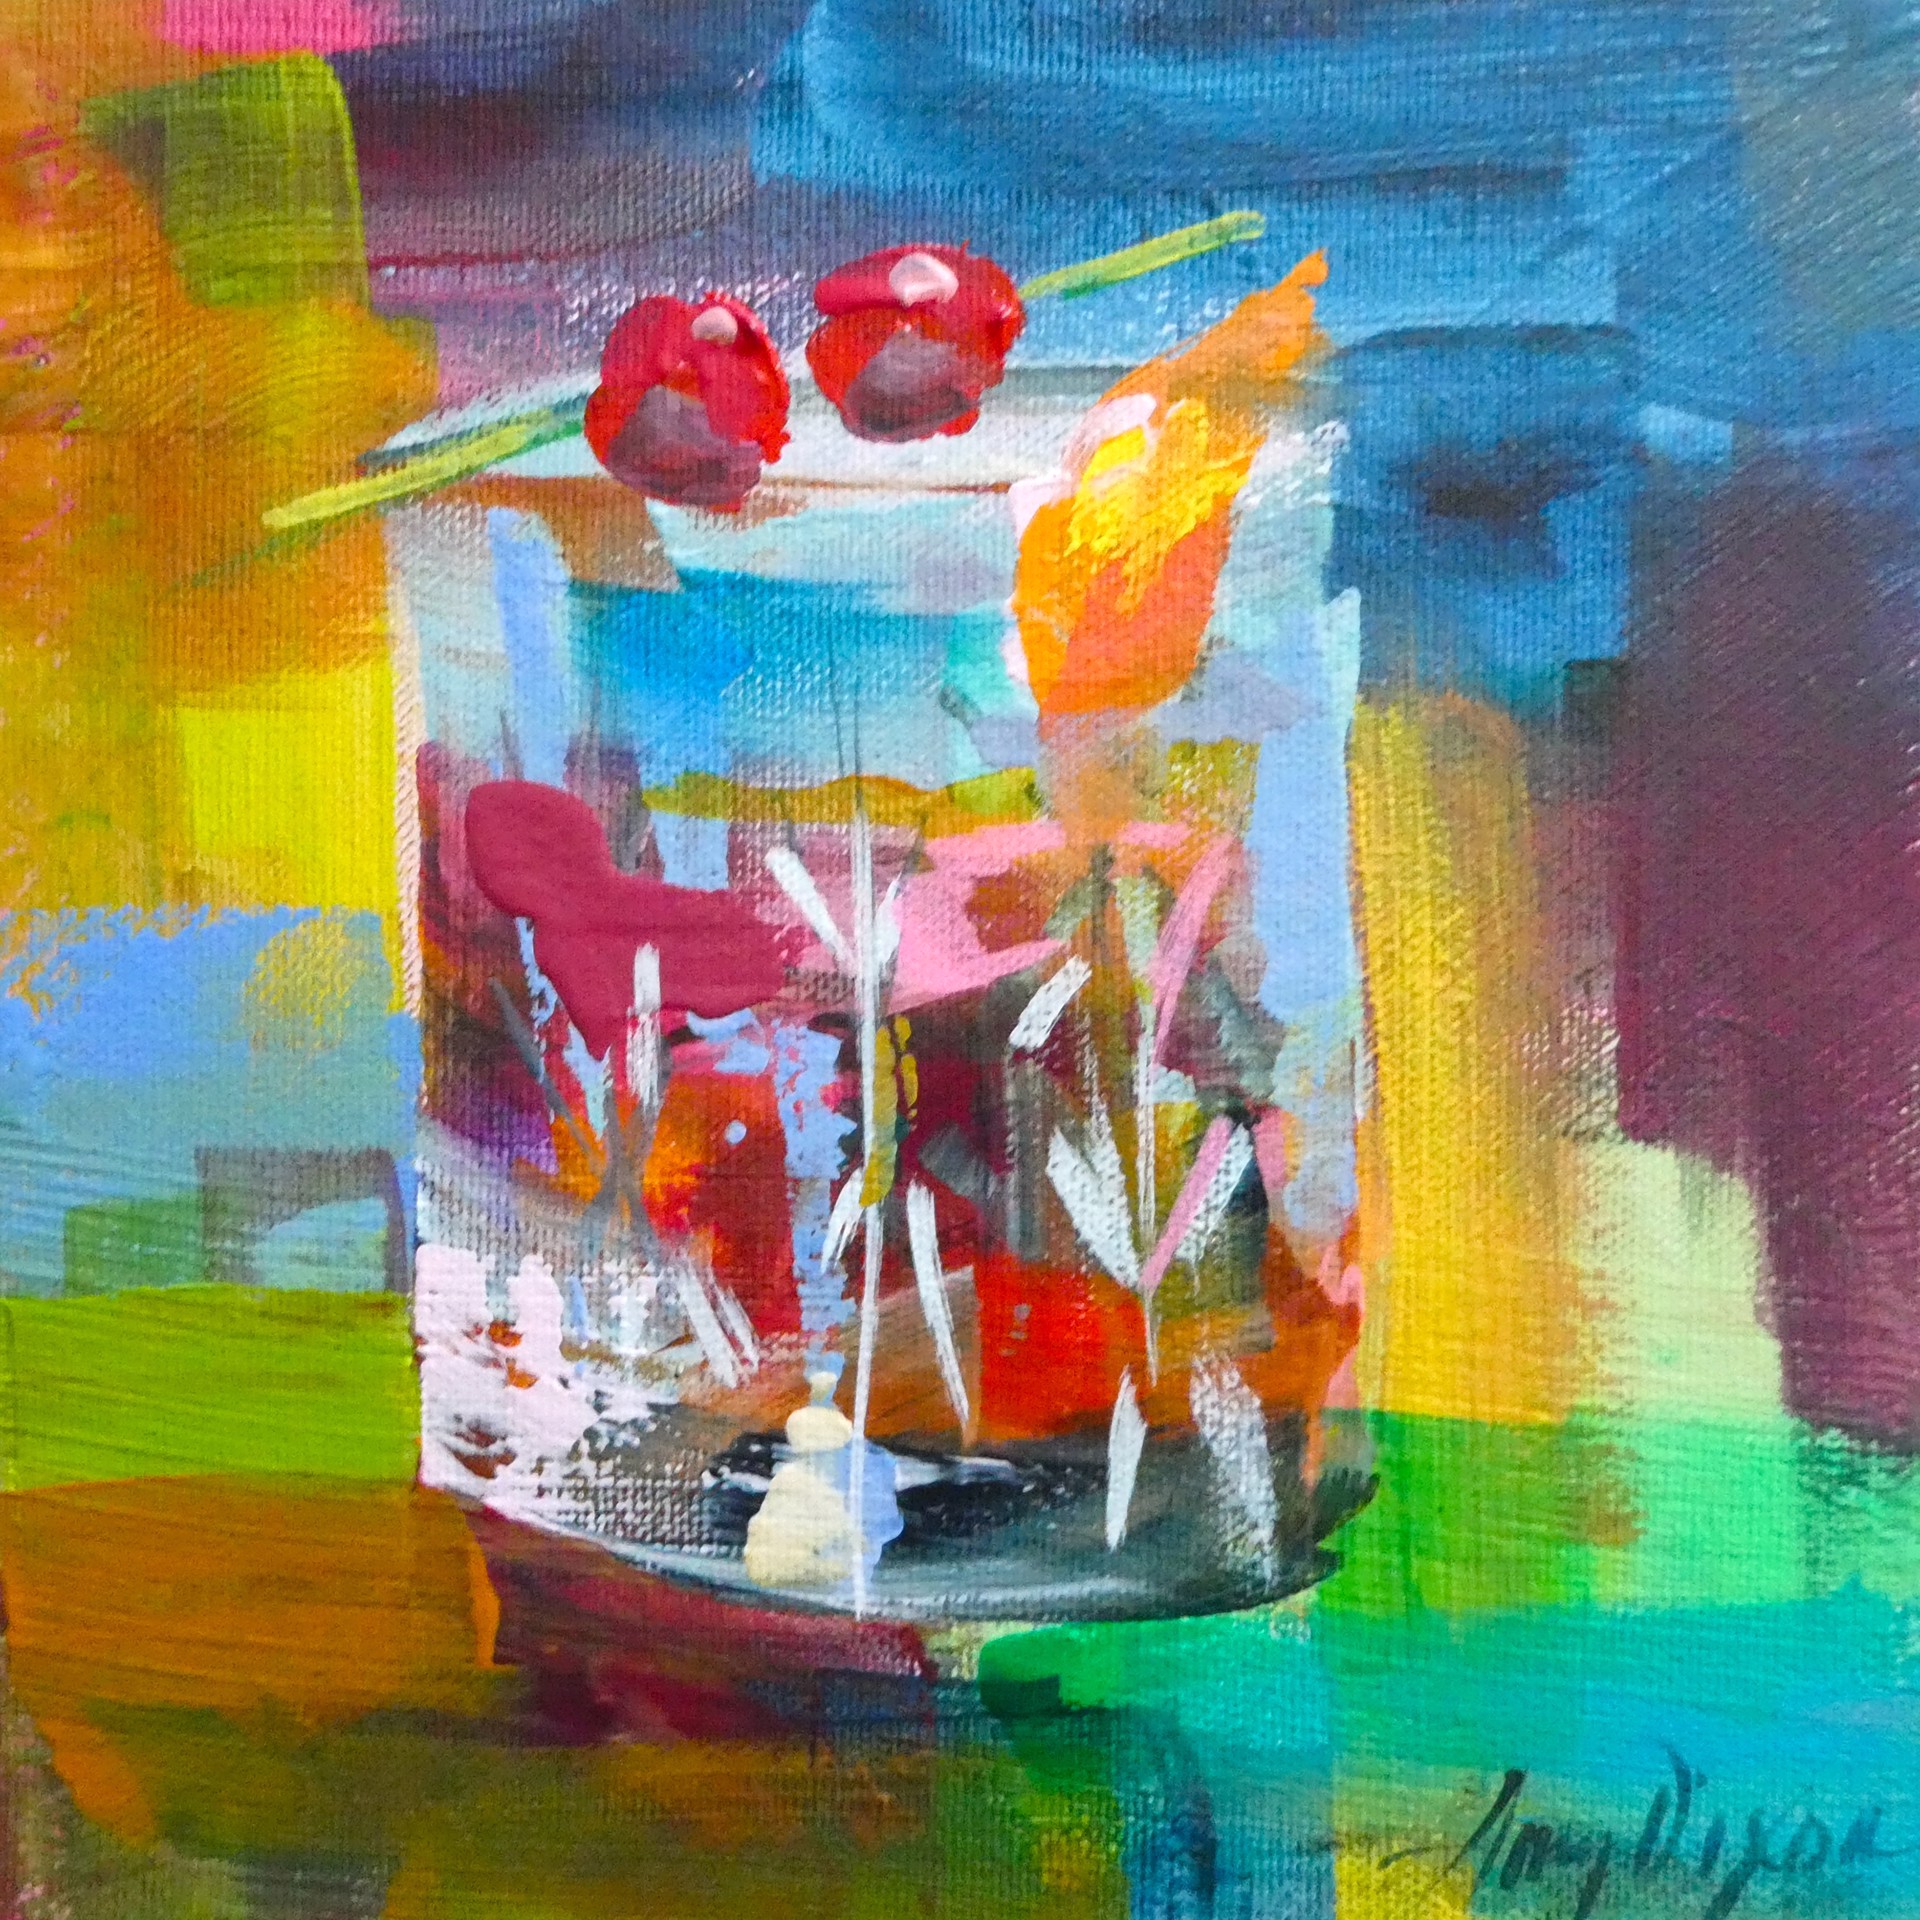 Old Fashion, Two Cherries by Amy Dixon